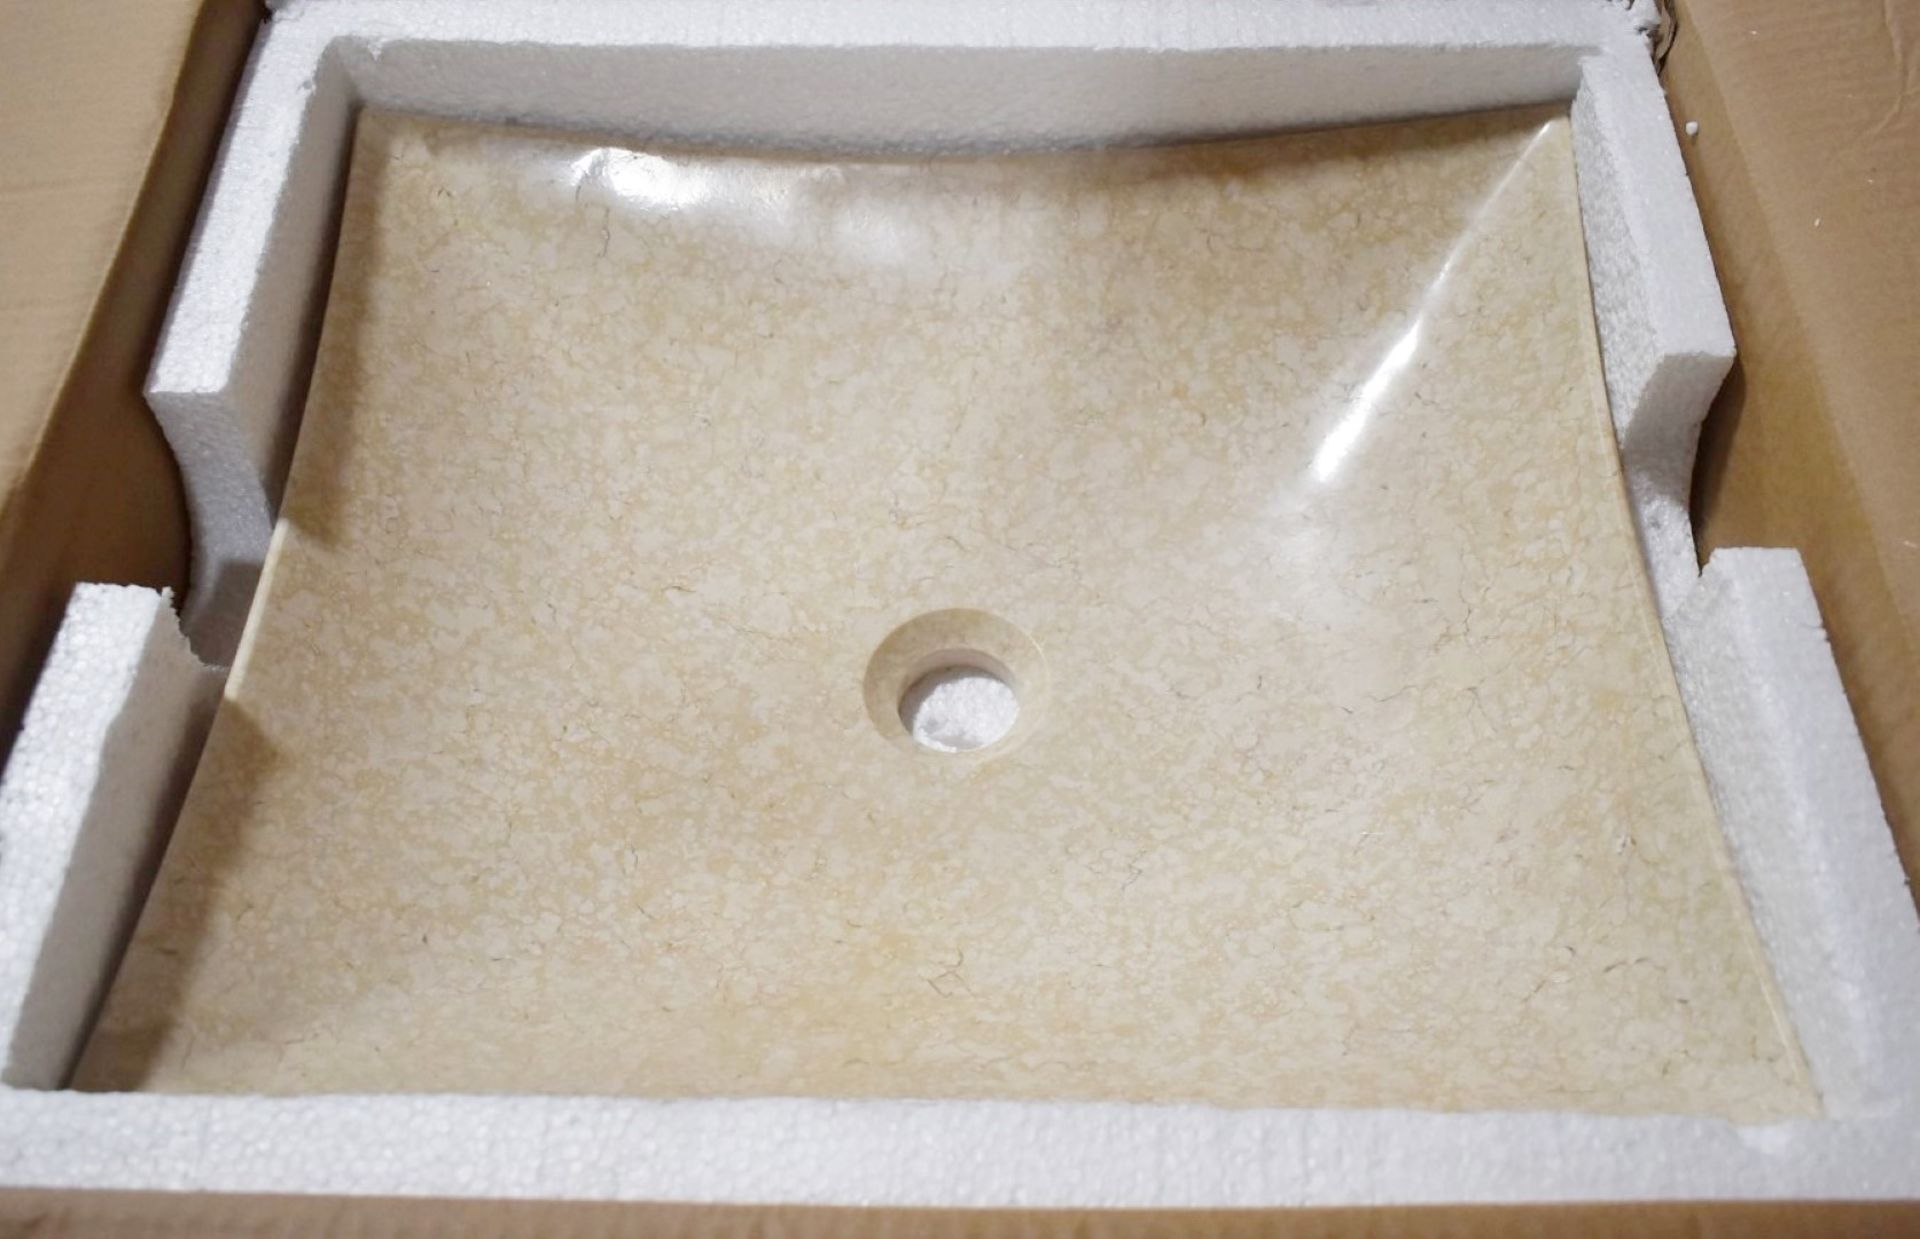 1 x Stonearth 'Aston' Solid Galala Marble Stone Countertop Sink Basin - New Boxed Stock - RRP £495 - Image 4 of 7